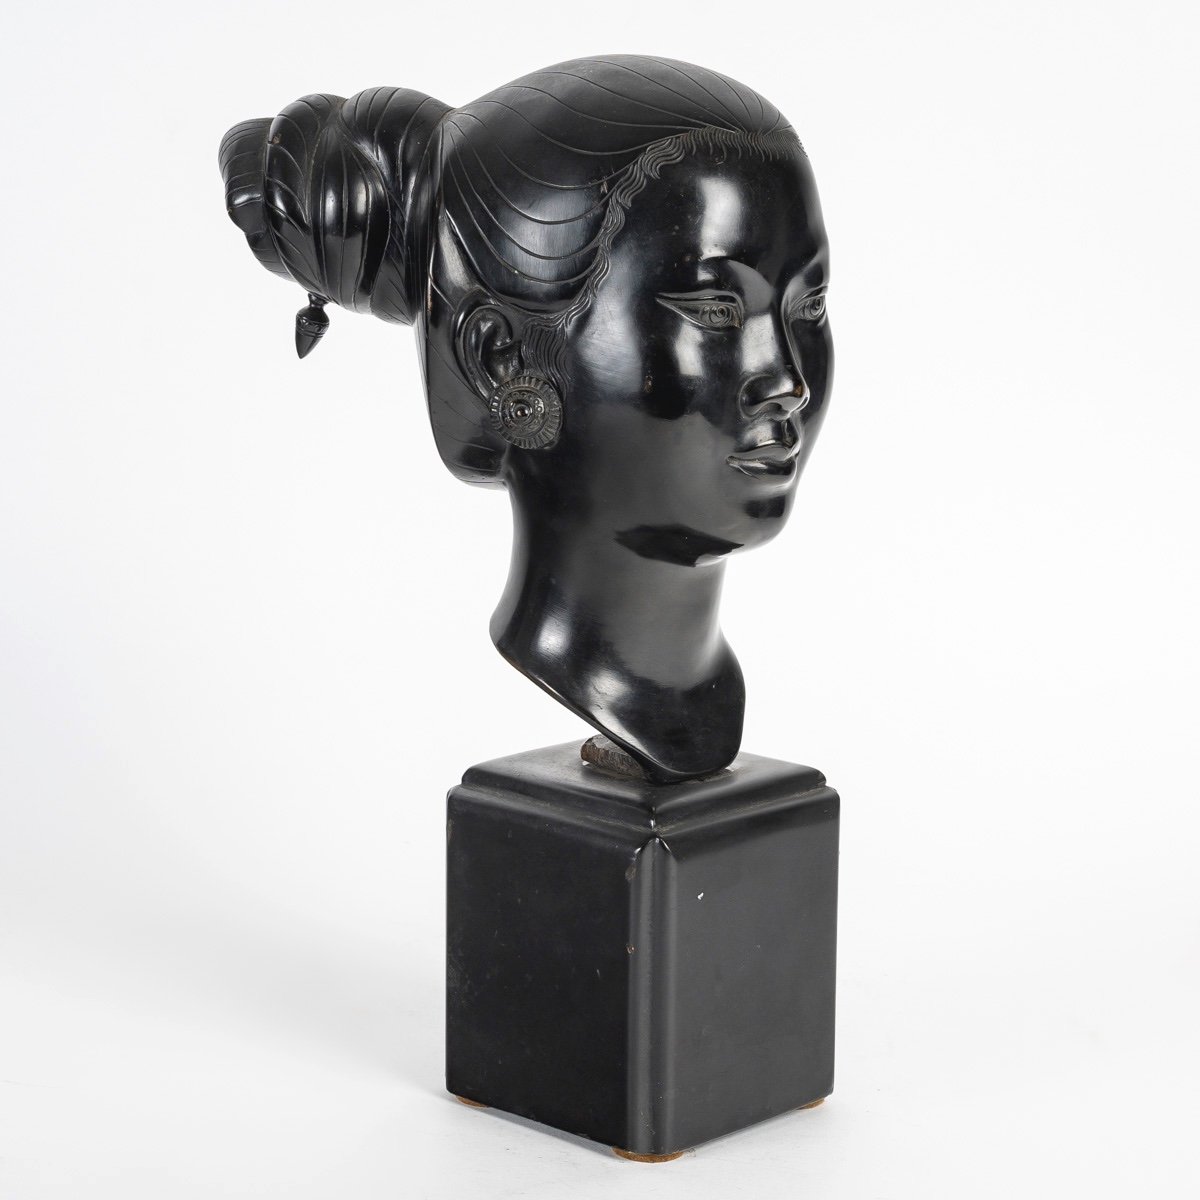 Brown Patina Bronze Sculpture, Sculpture Signed Gia-loï, Early 20th Century